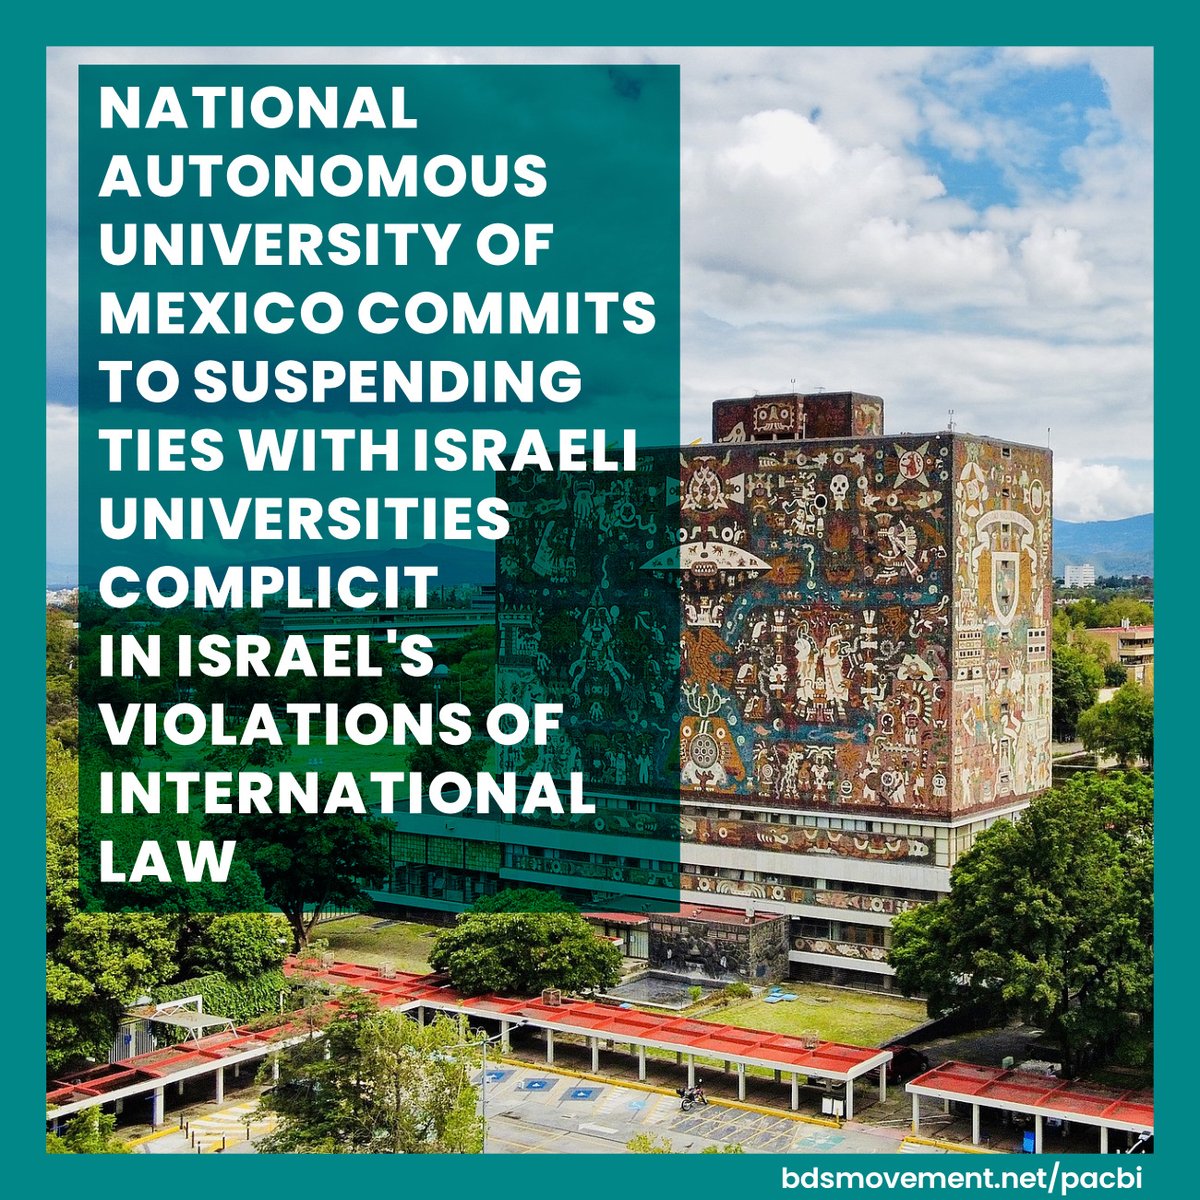 National Autonomous University of Mexico to suspend ties with Israeli universities complicit in int'l law violations. *All* Israeli universities persistently & systematically play a key role in Israel’s grave violations of int'l law & Palestinian rights. loom.ly/353E3fM